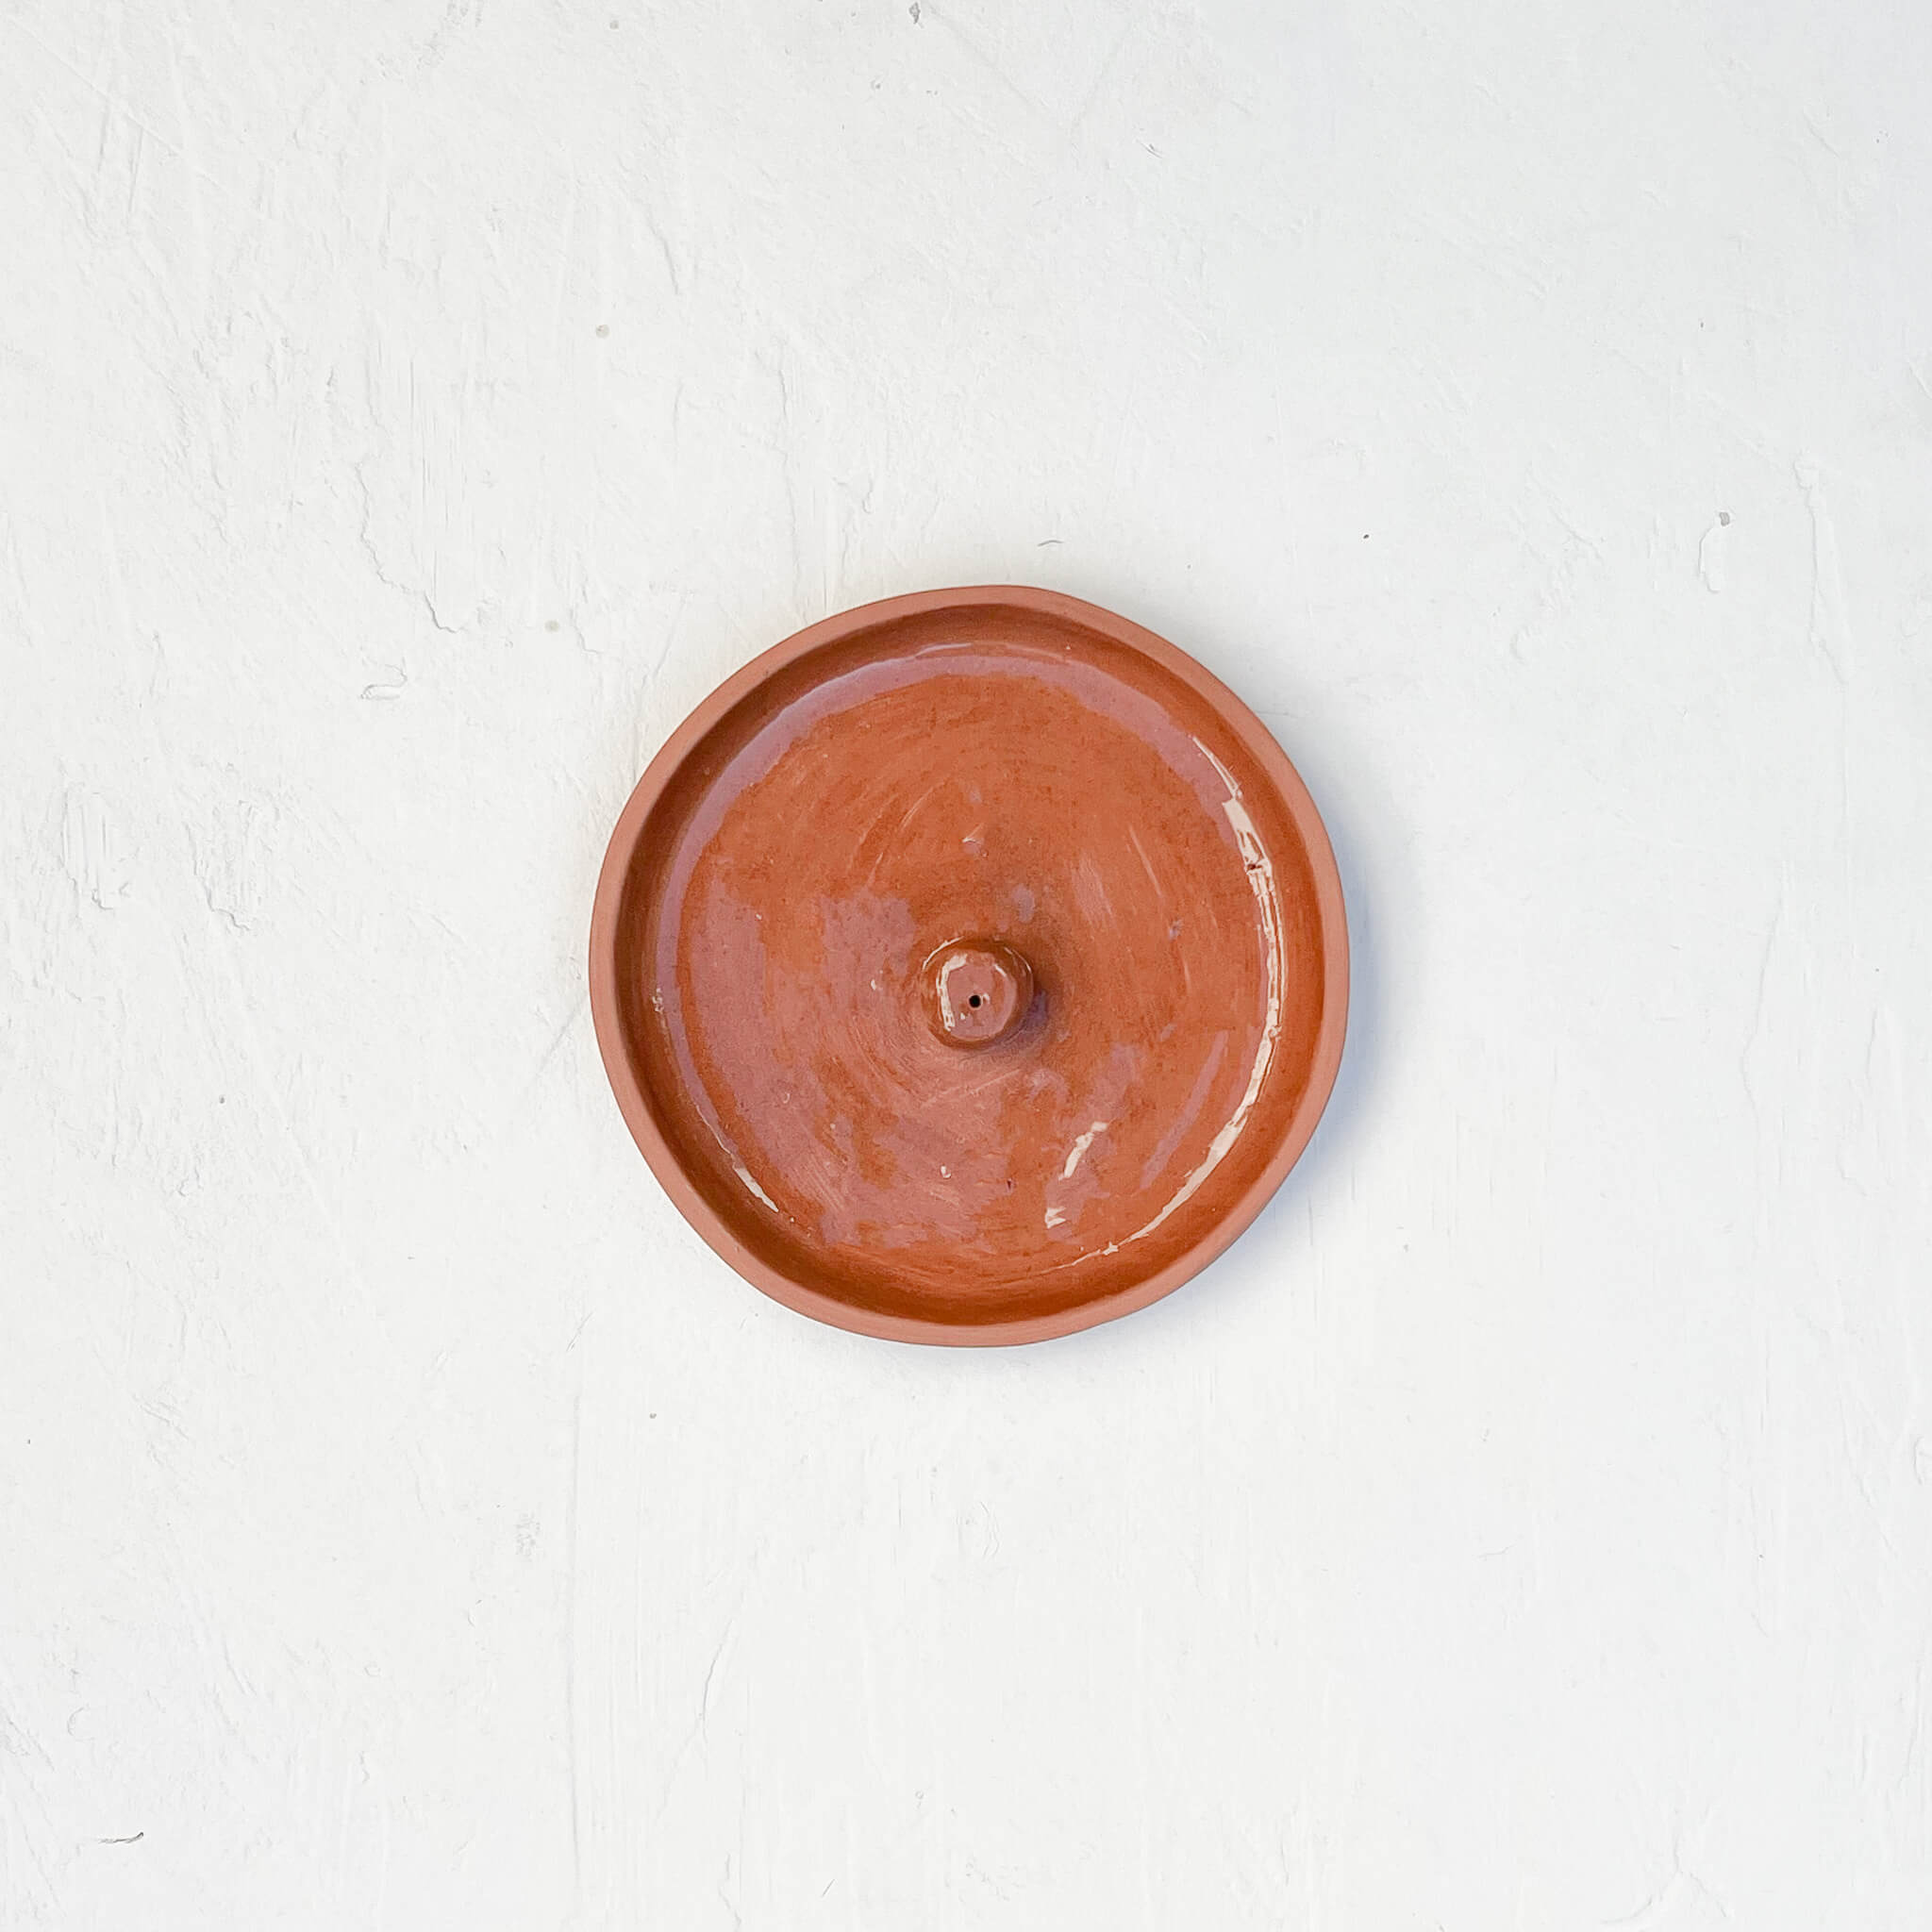 A terracotta incense holder on a white background.